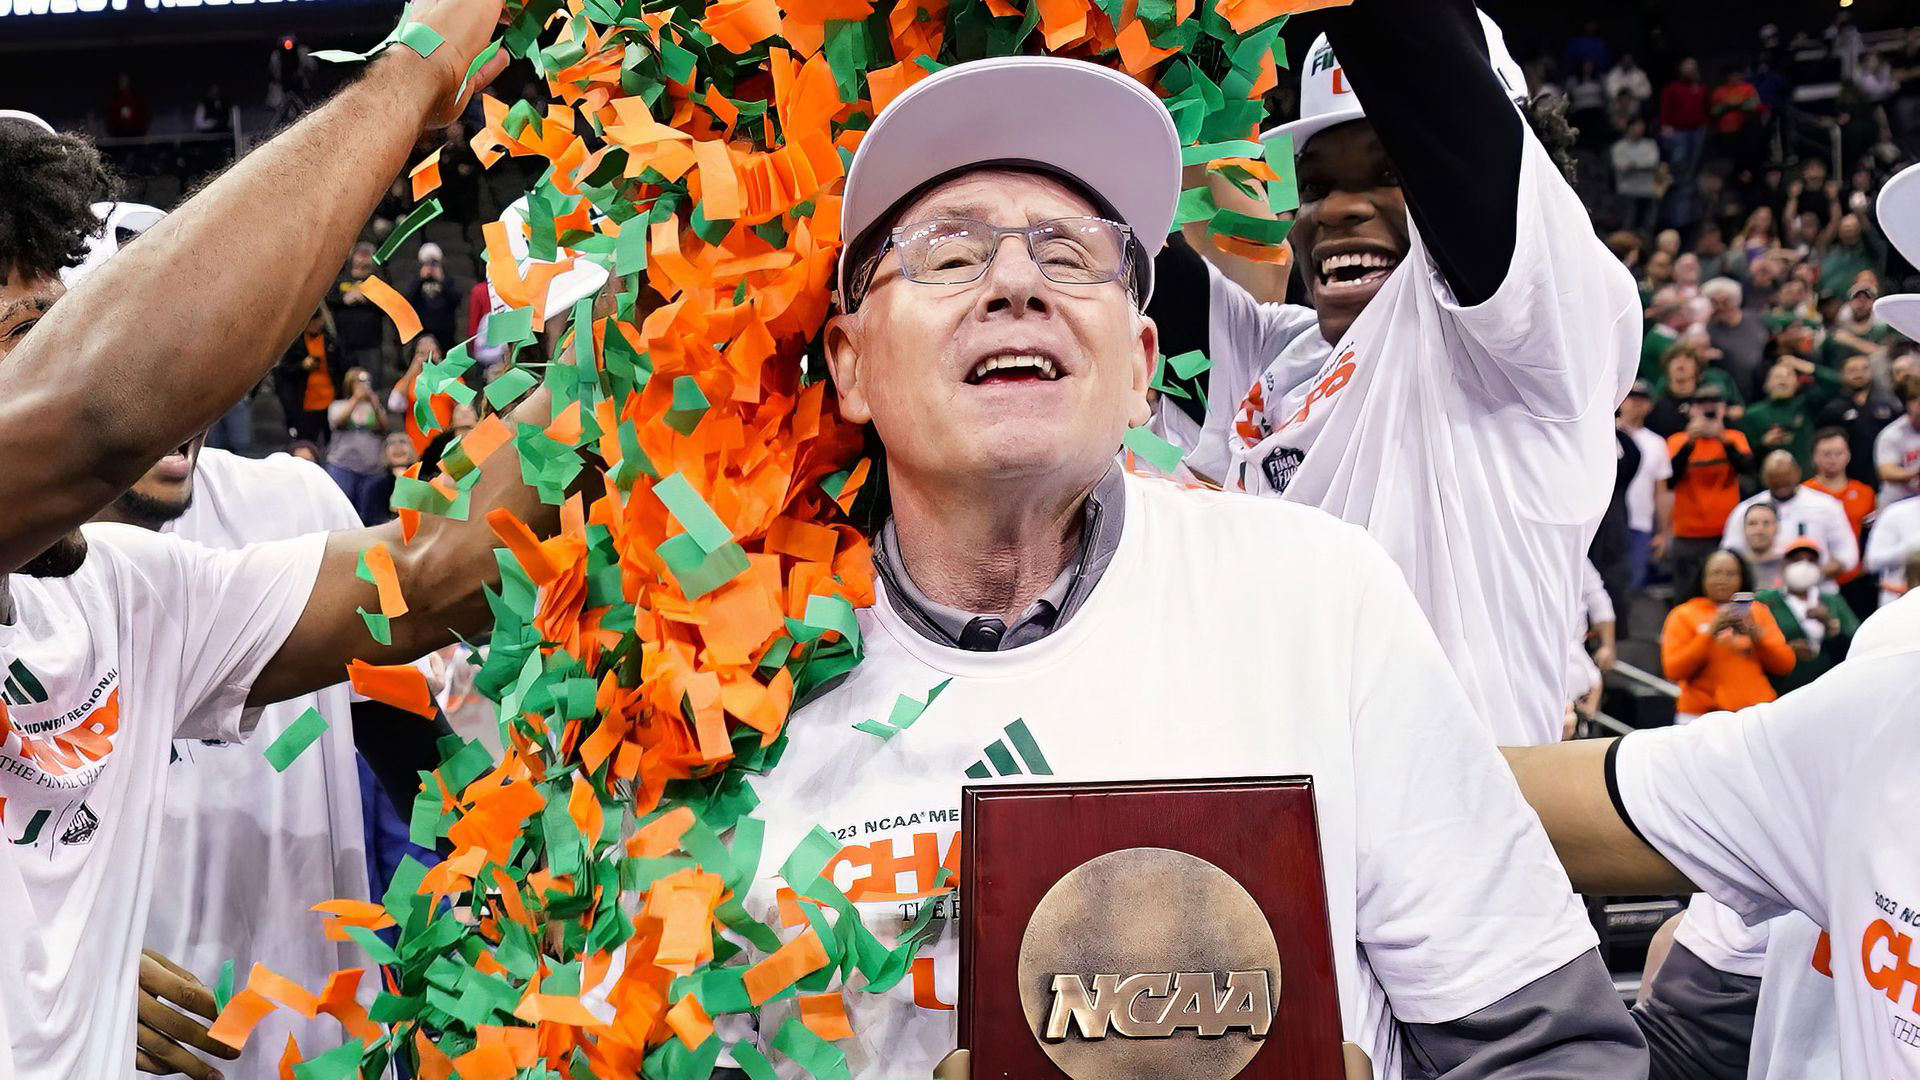 First Look at Miami Hurricanes Basketball Schedule